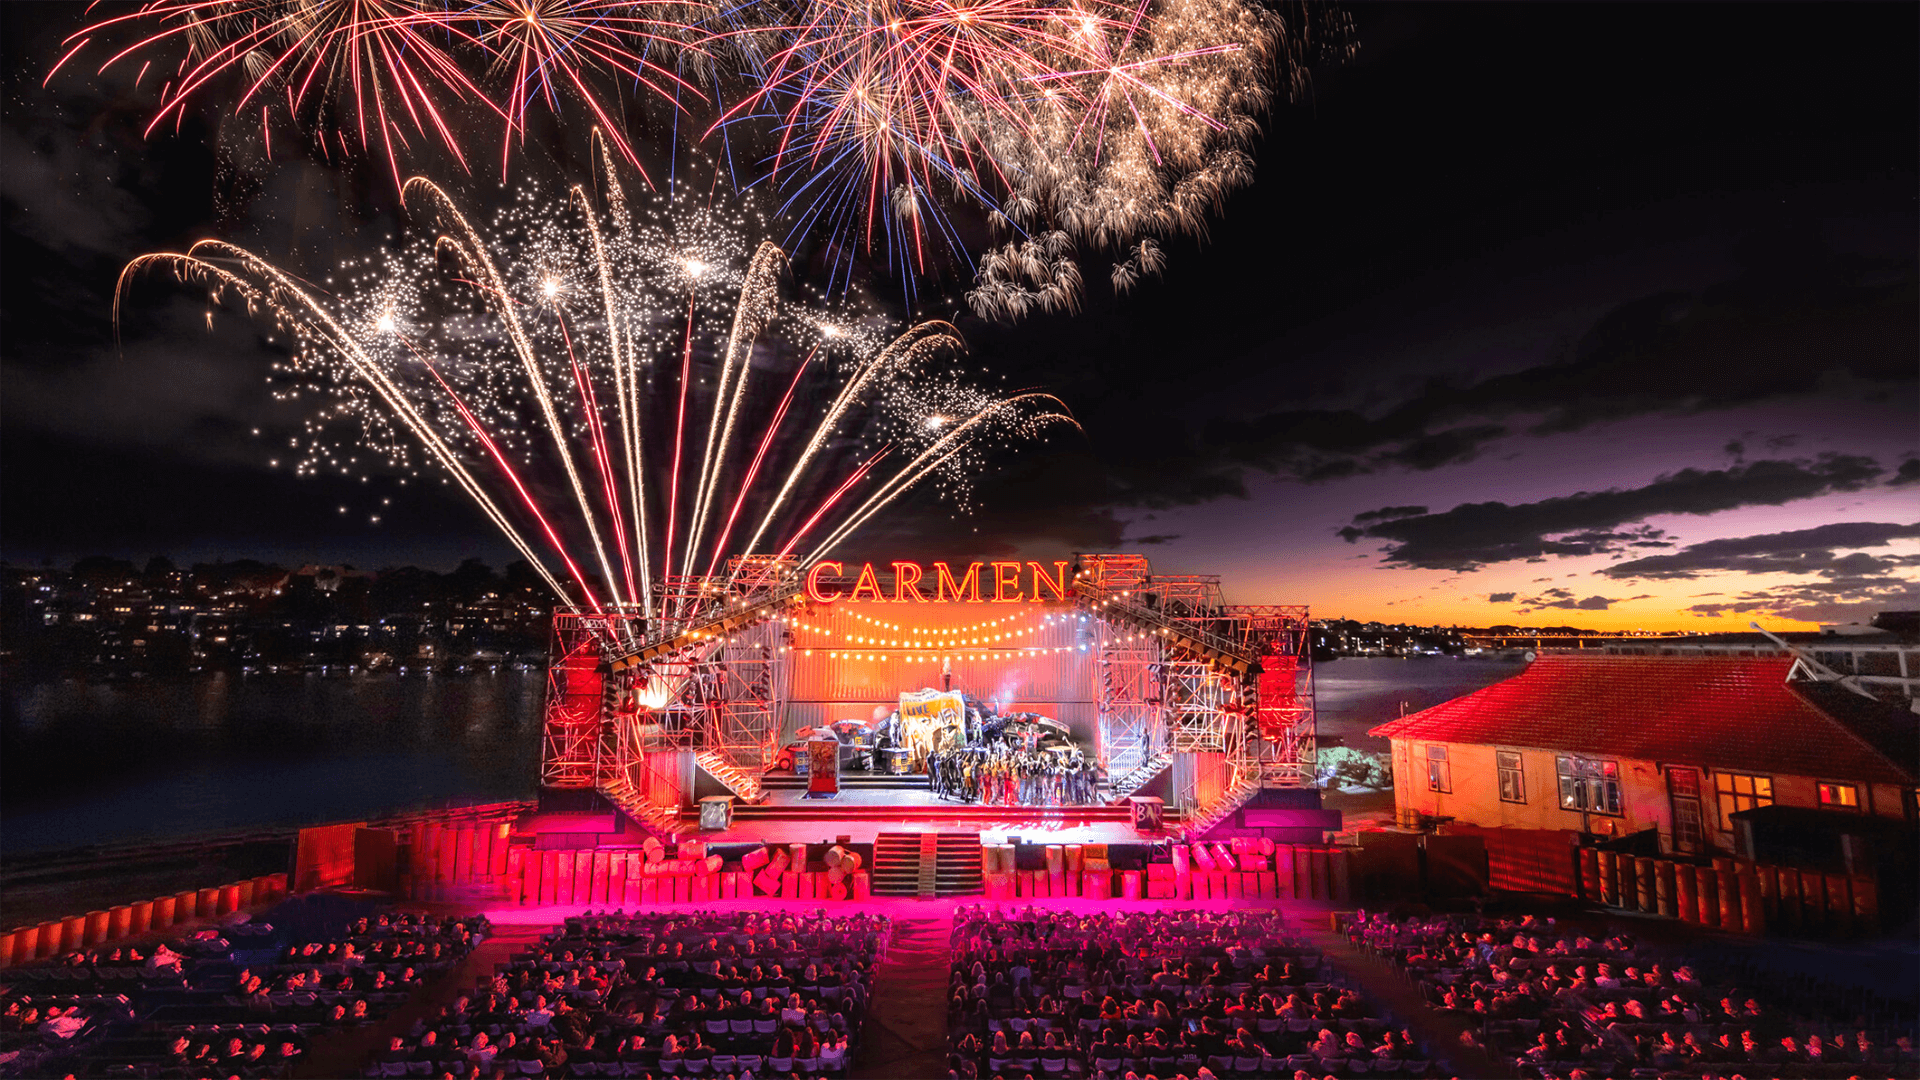 The stage of Carmen on Cockatoo Island flanked by fireworks and graphics by VANDAL